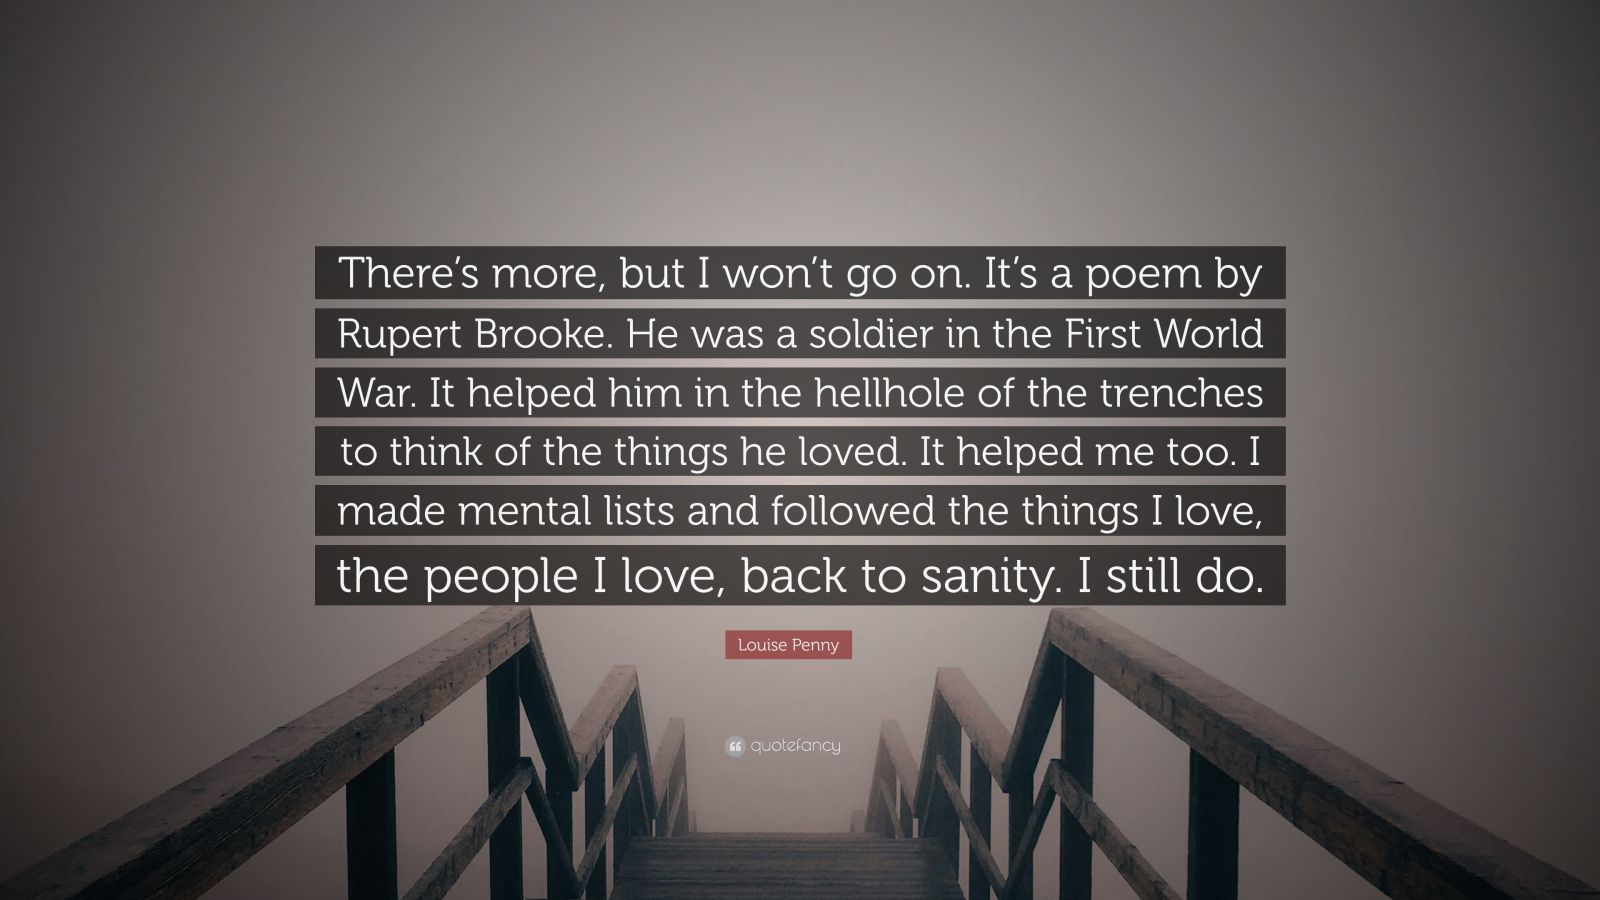 Louise Penny Quotes (335 wallpapers) [Page 3] - Quotefancy